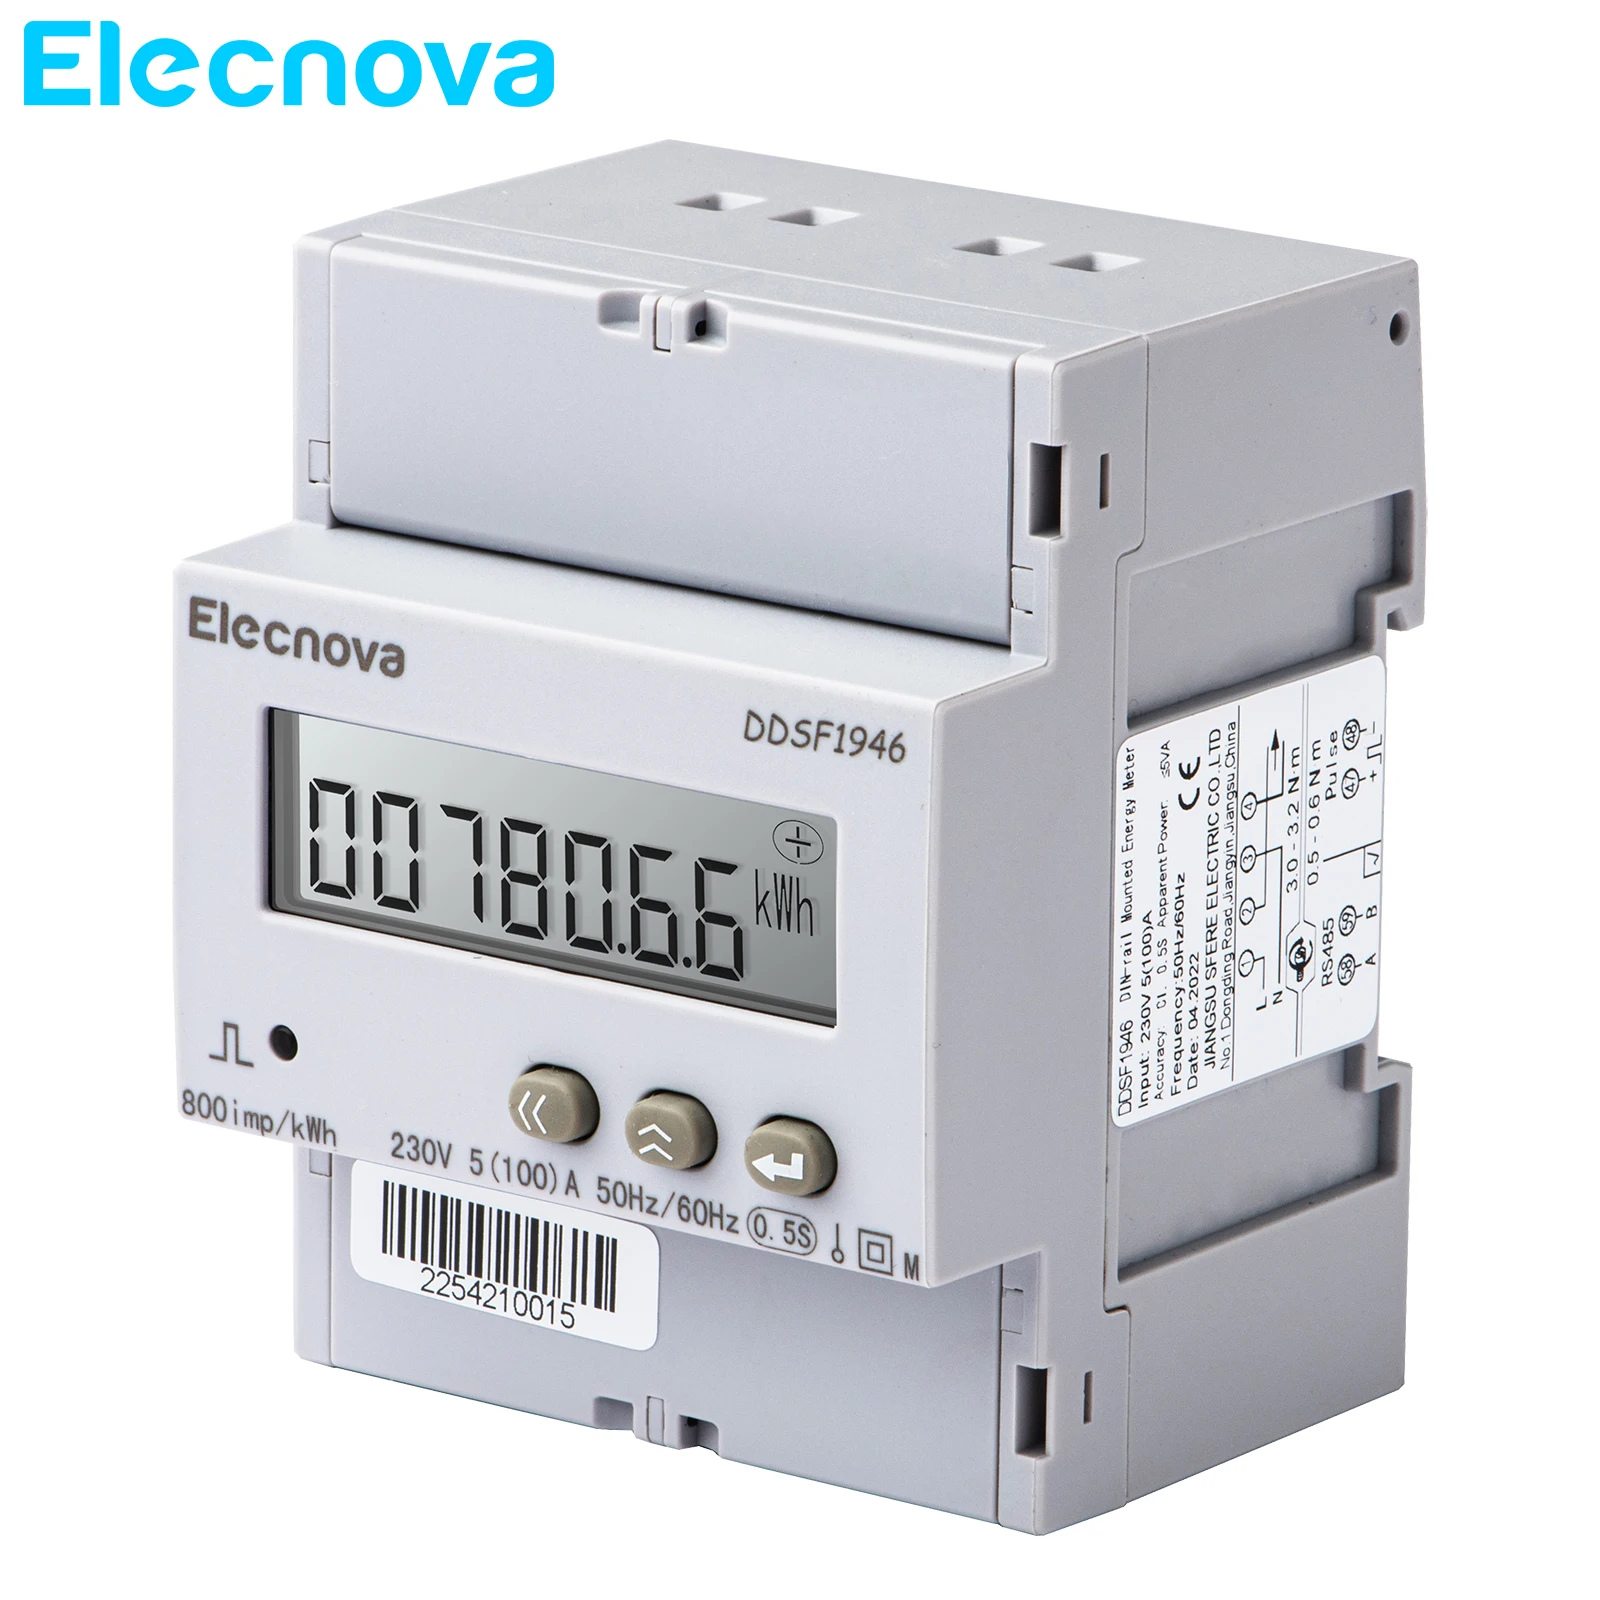 DDSF1946 Multirate Energy Power Kwh Meter 1 Phase RS485 DIN Rail Digital LCD Voltage Current Power Factor Frequency Multimeter